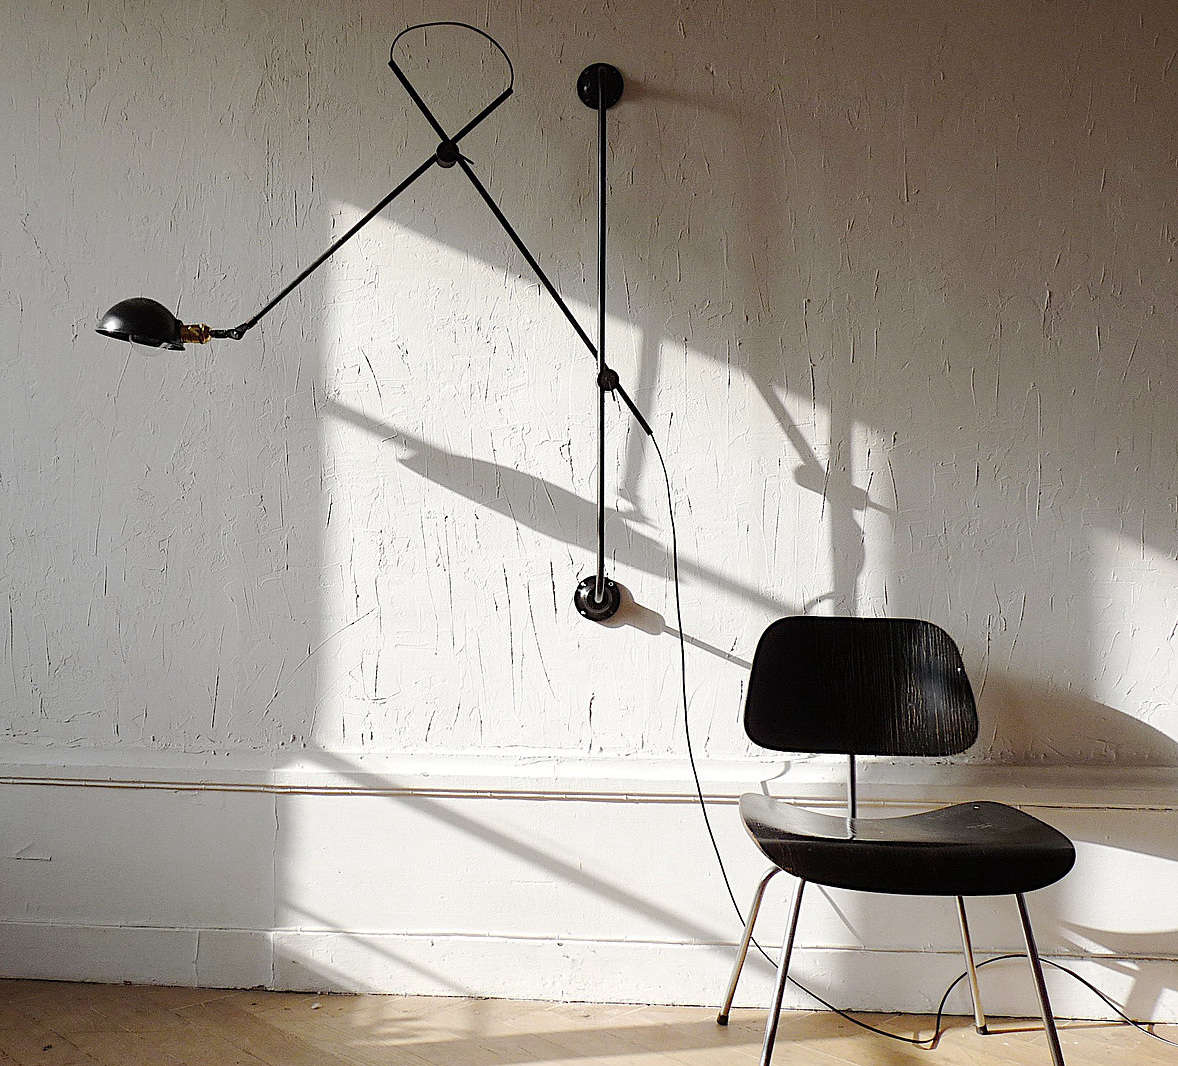 wo we adjustable two arms wall lamp in situ  